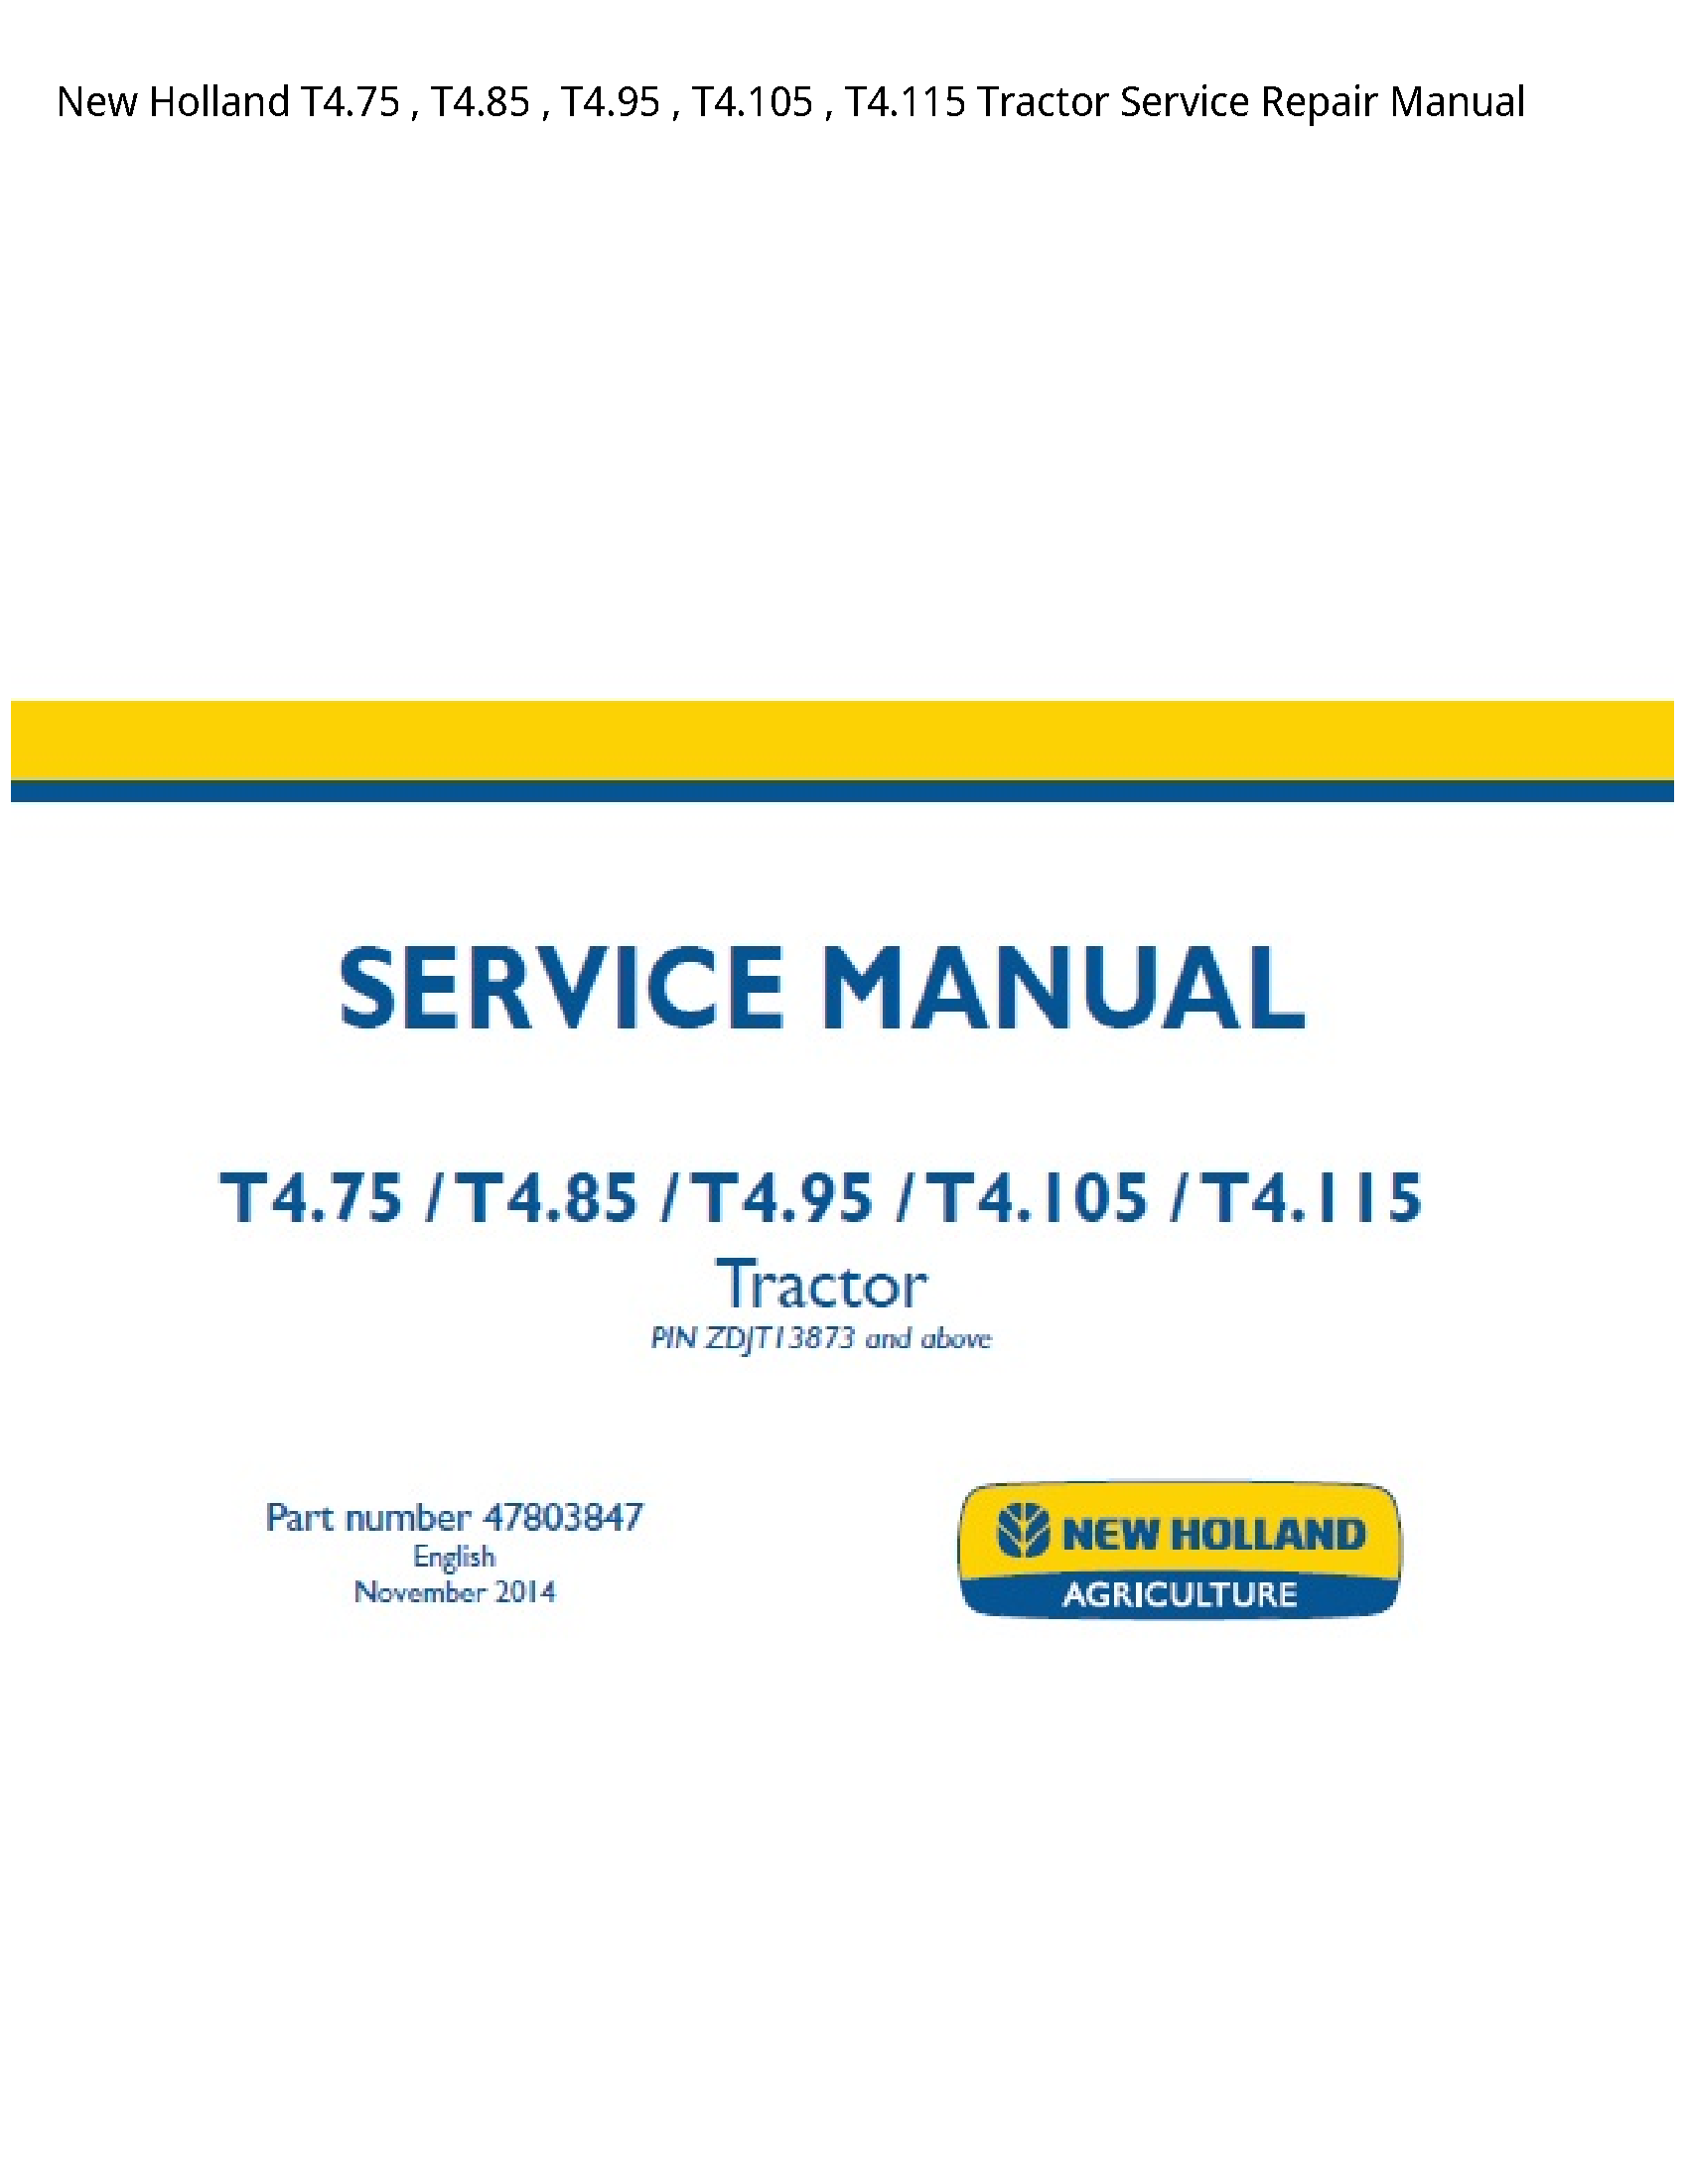 New Holland T4.75 Tractor manual